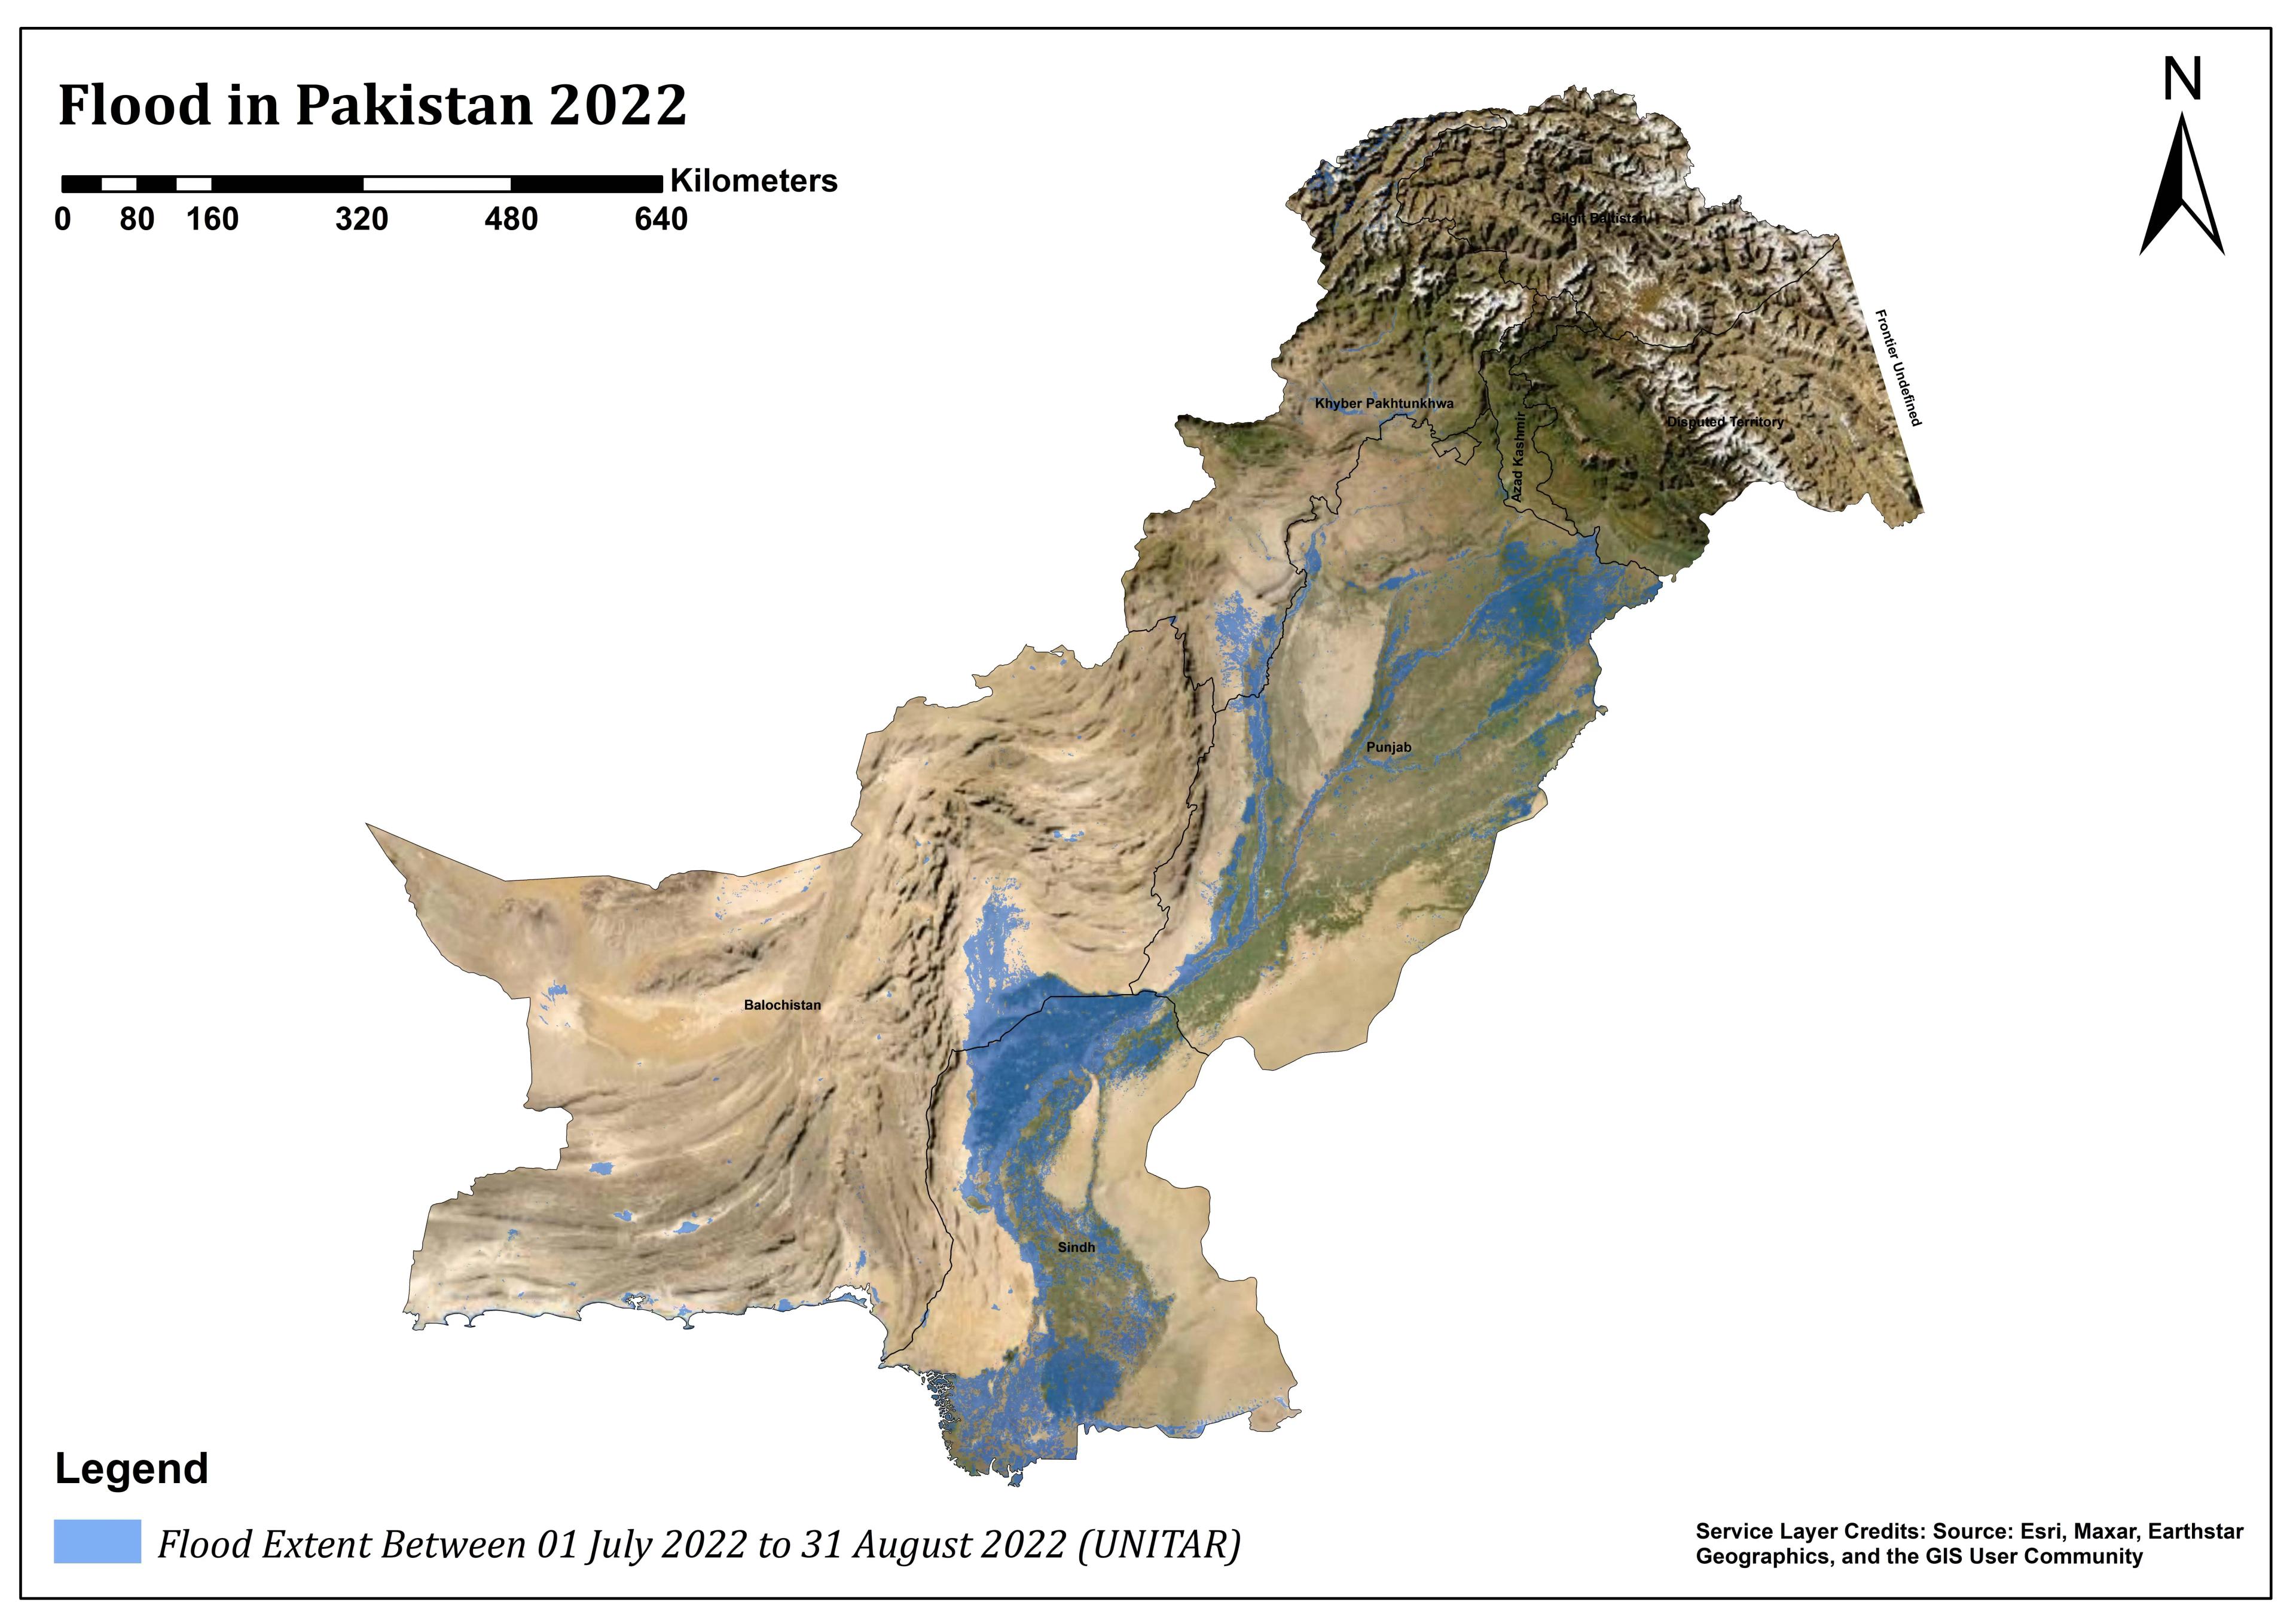 Flood Extent in the Province of Pakistan